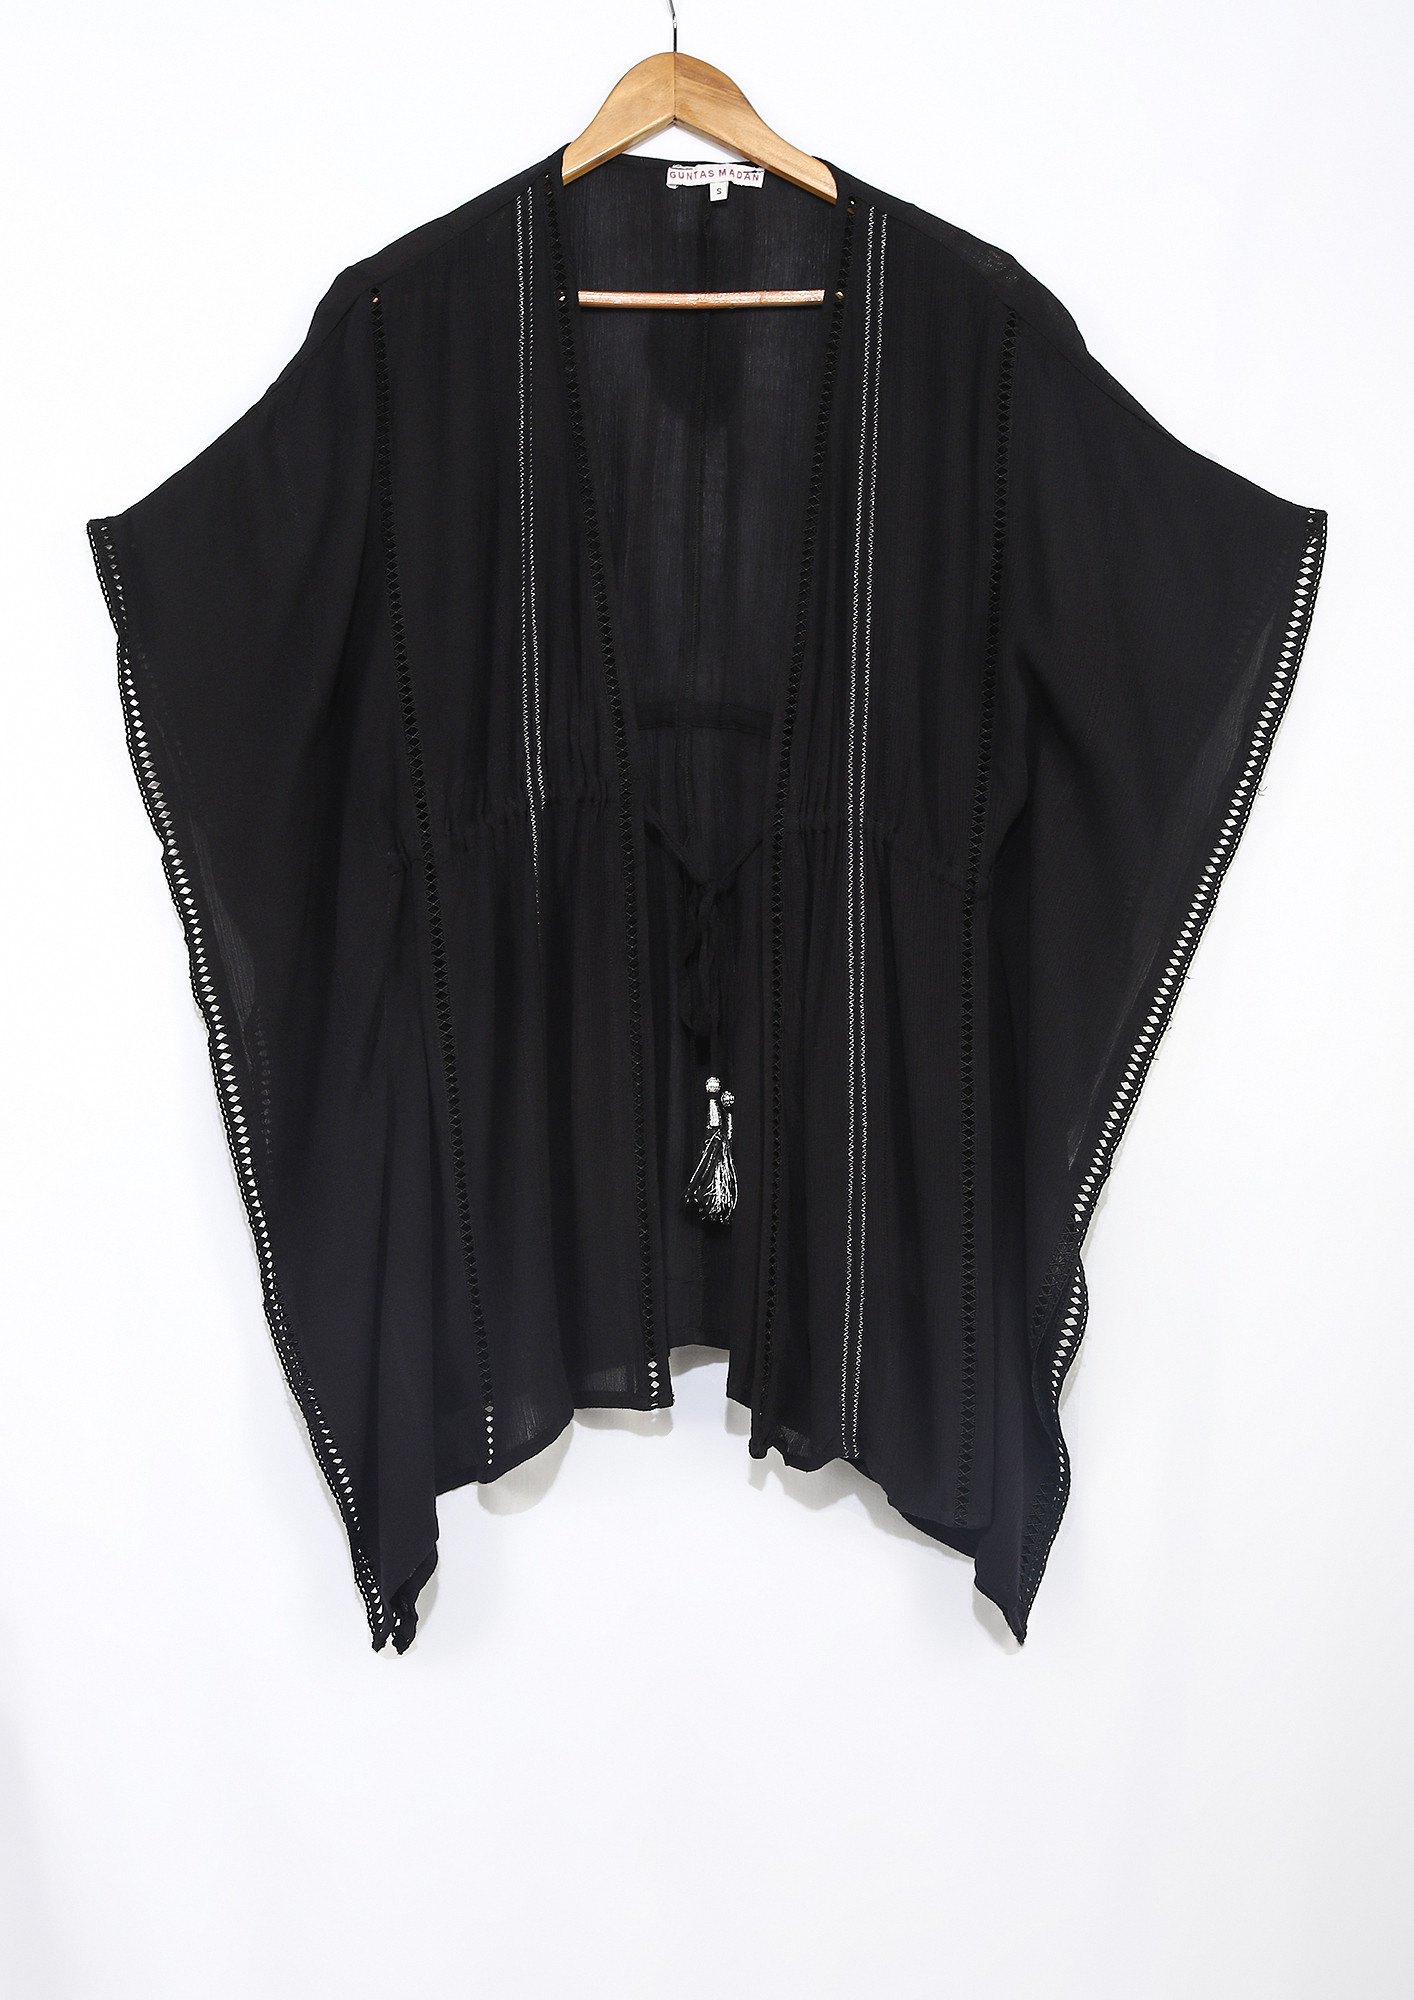 RELAXED FRONT-TIE WITH TASSEL DETAIL BLACK KIMONO